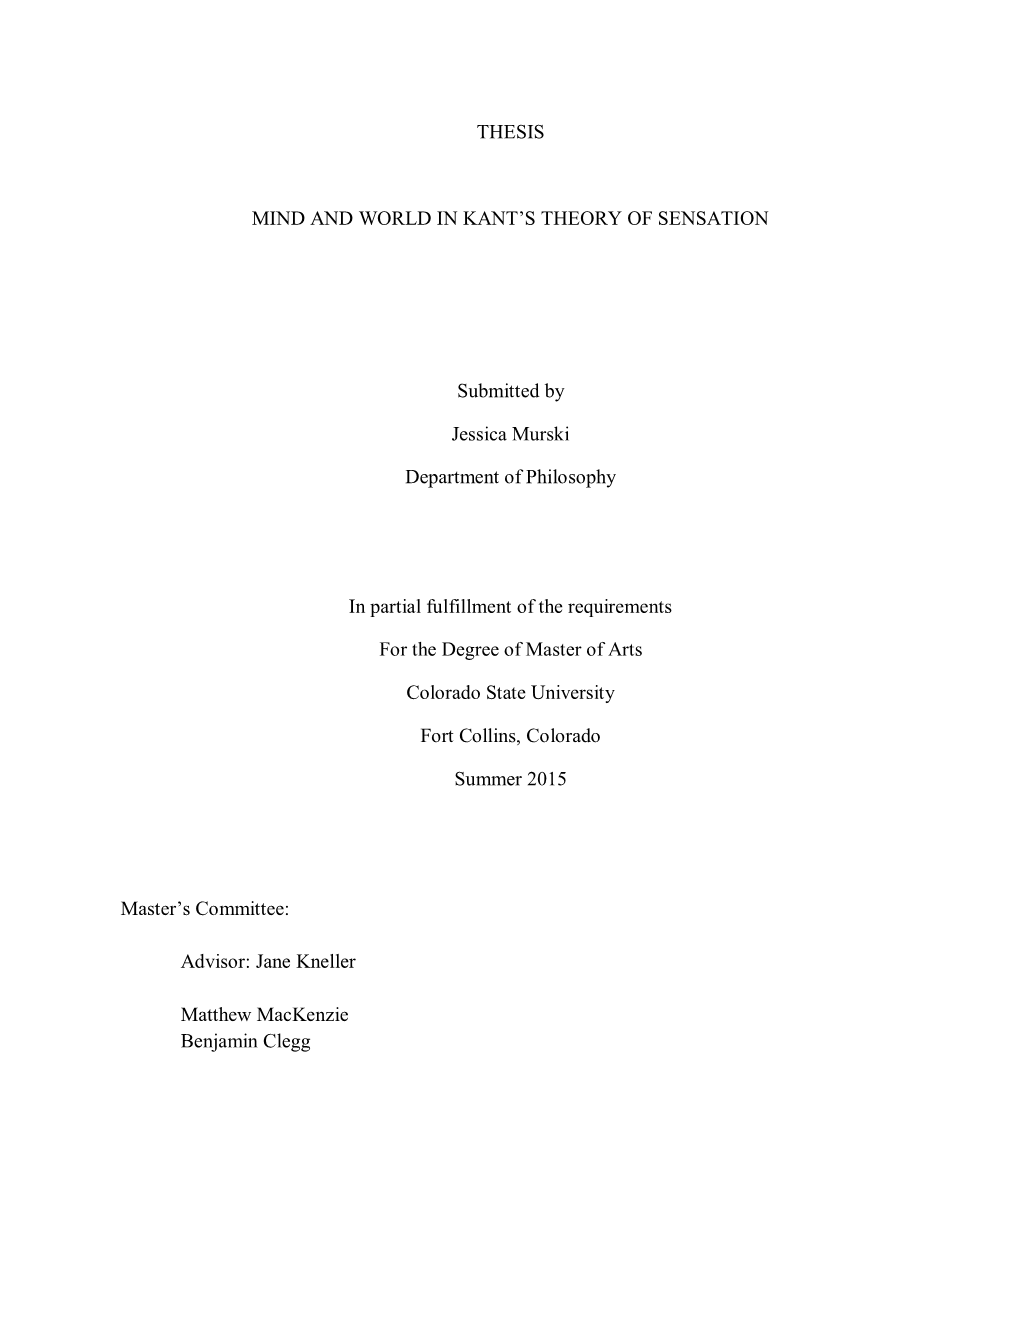 Thesis Mind and World in Kant's Theory of Sensation